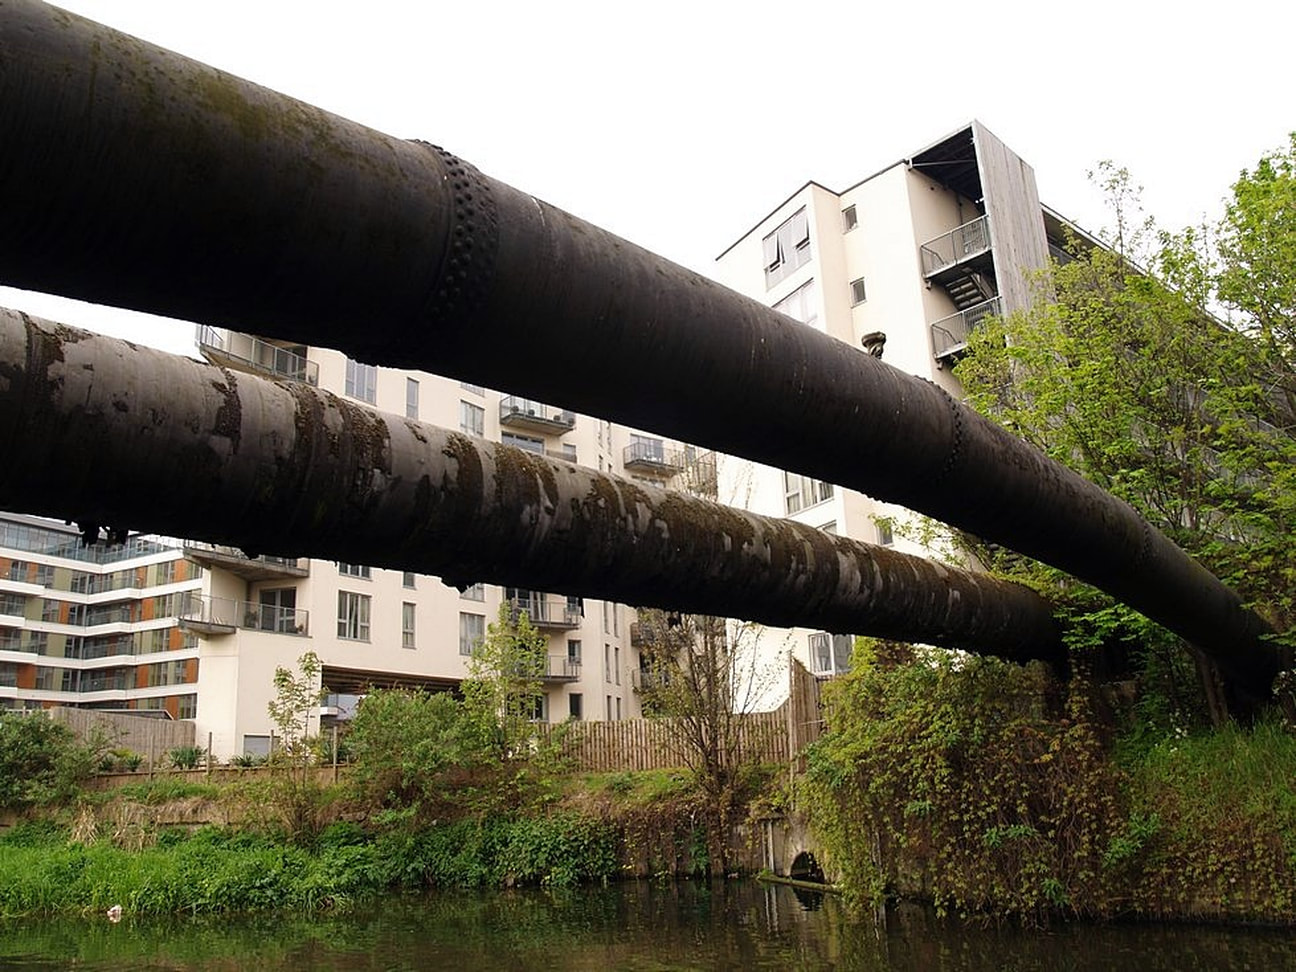 London's Lost Rivers - Hackney Brook's outfall into the River Lea near Old Ford Lock can be seen by way of a small arch while the main sewer network crosses overhead.